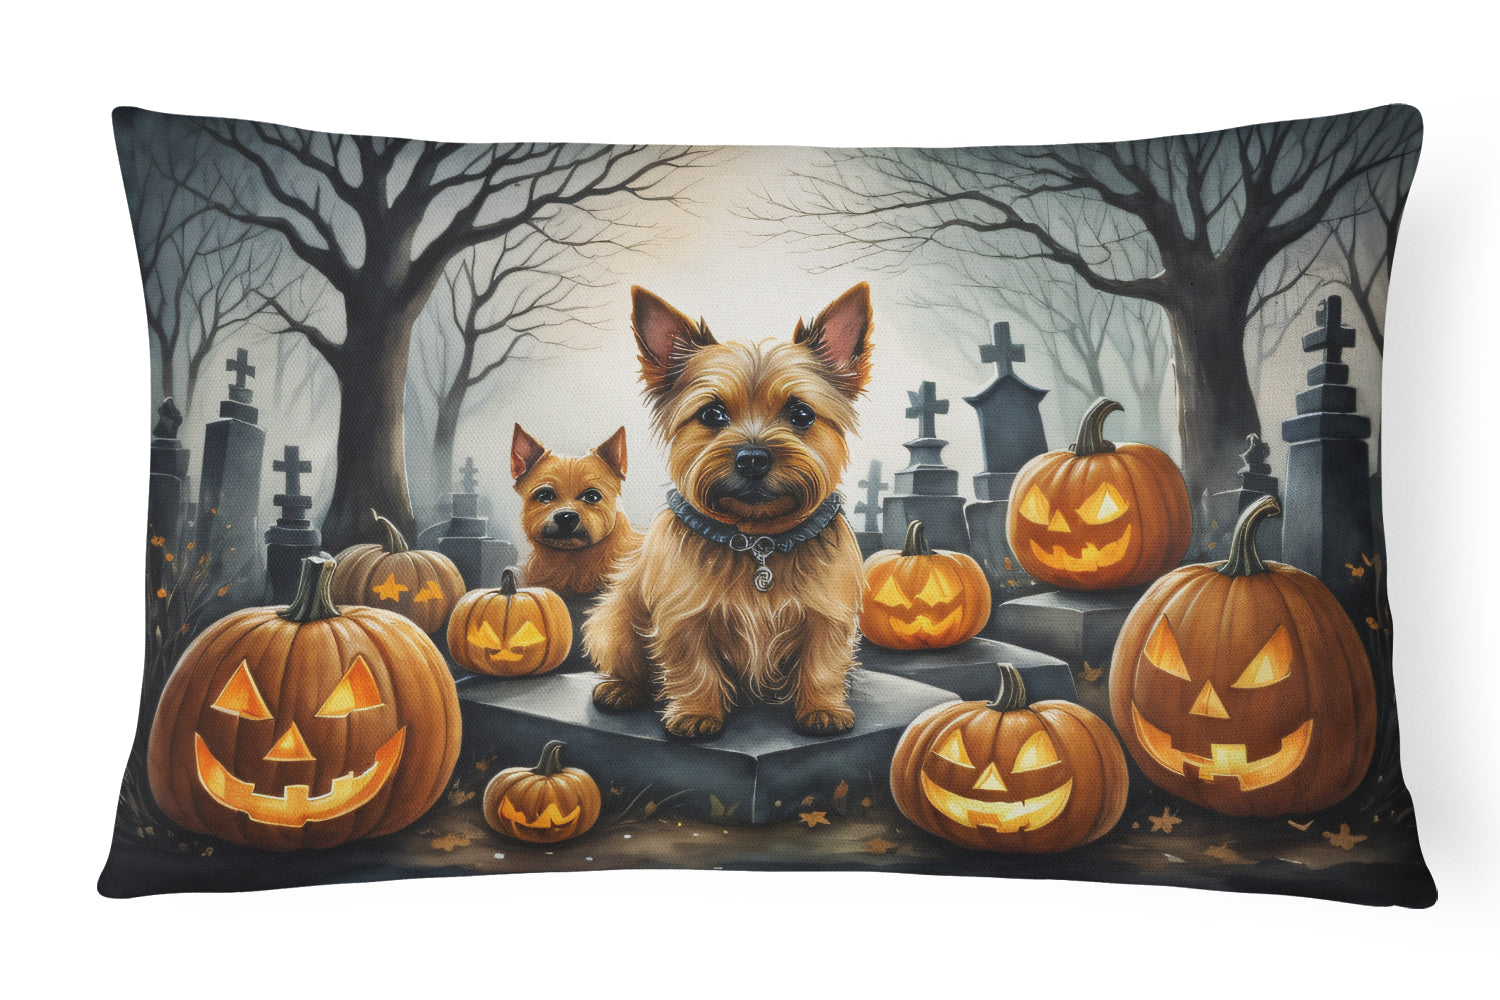 Buy this Norwich Terrier Spooky Halloween Fabric Decorative Pillow